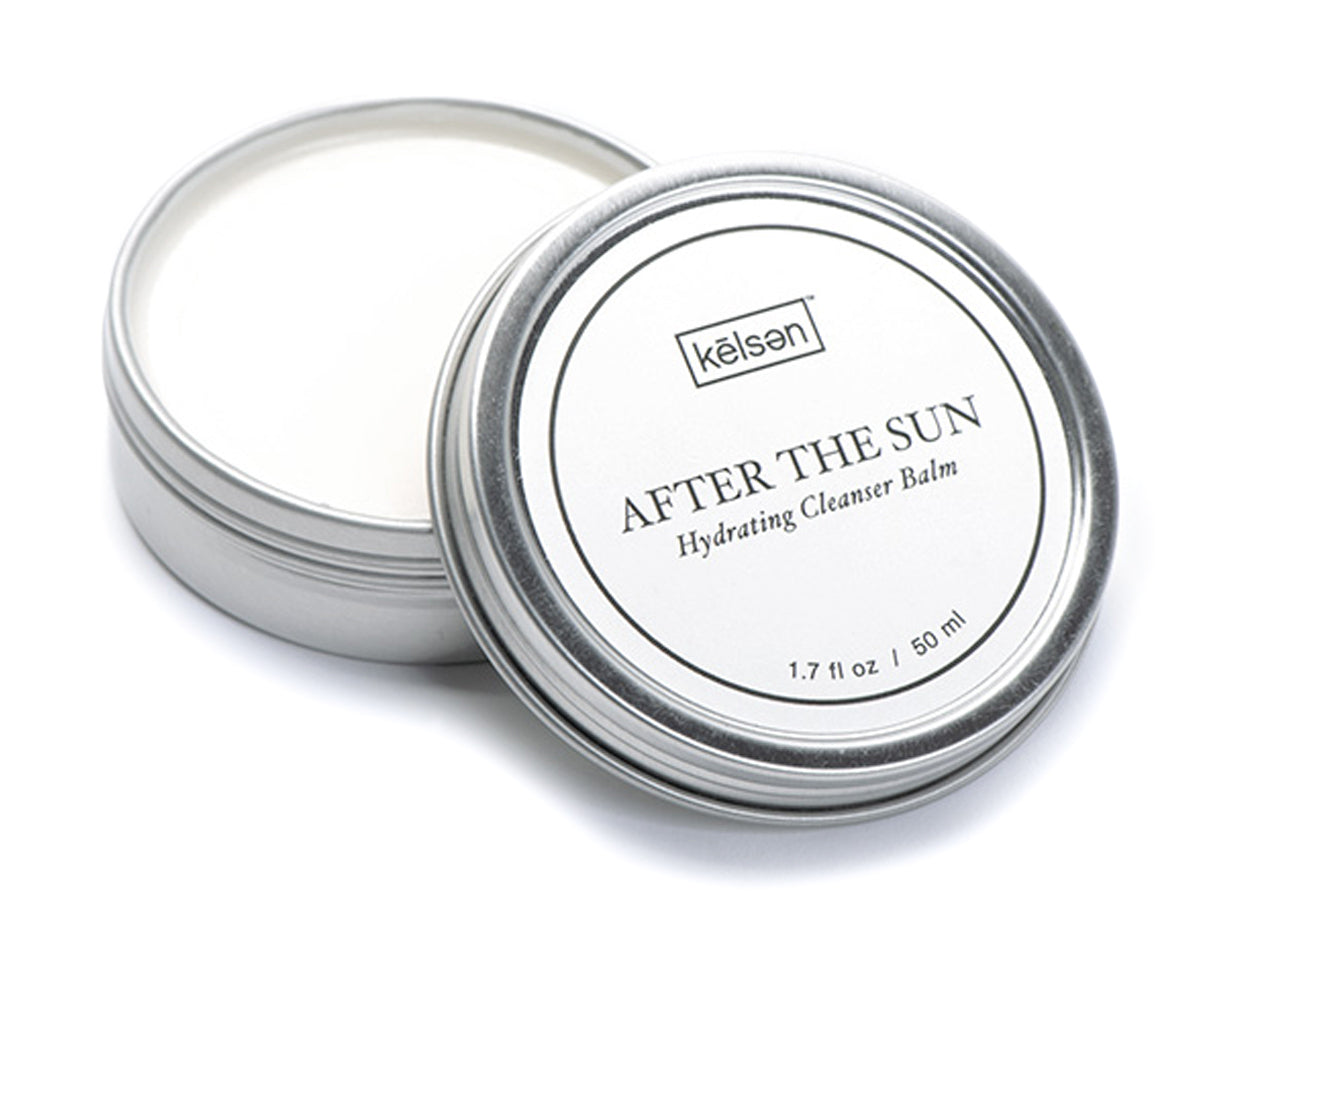 After the Sun - Zinc Paste or Makeup Remover / Hydrating Cleanser Balm